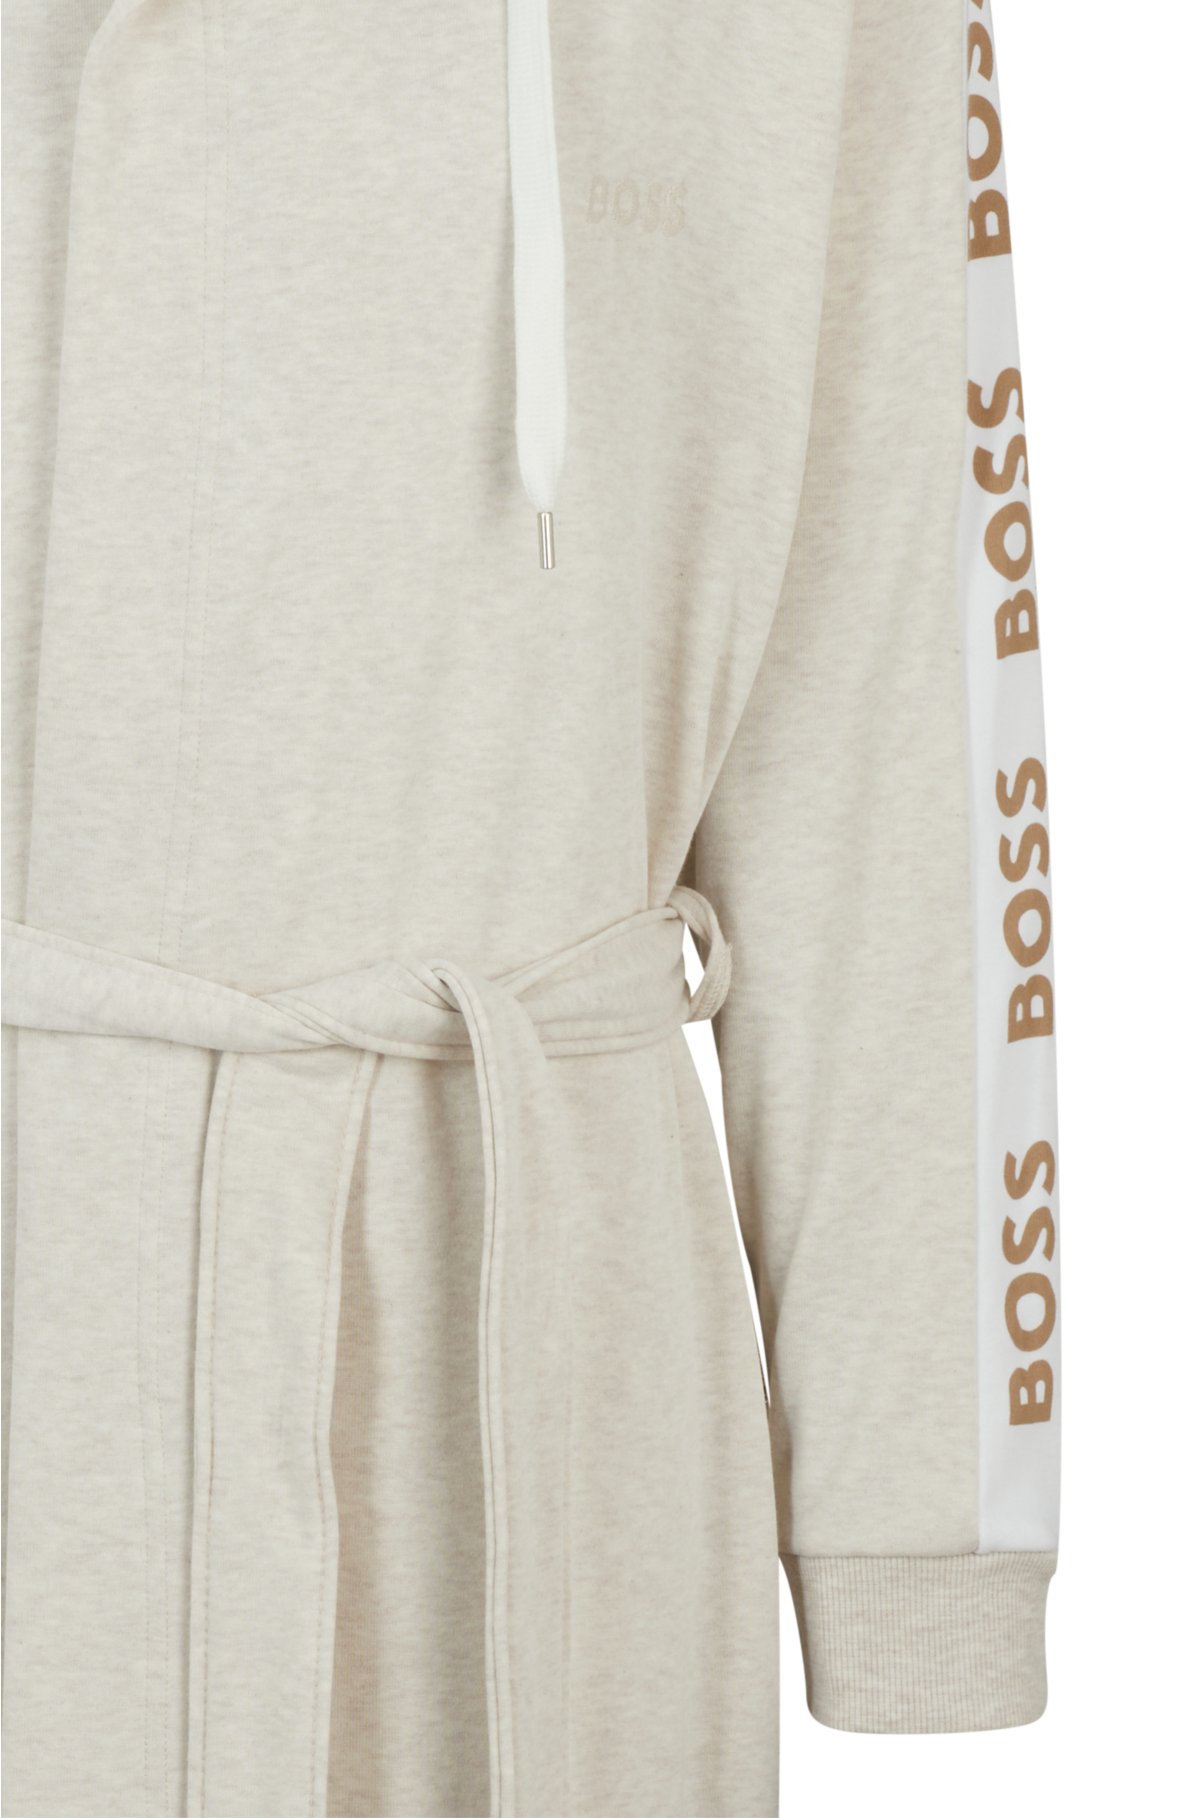 Hooded dressing gown with logo-print sleeves, Light Beige